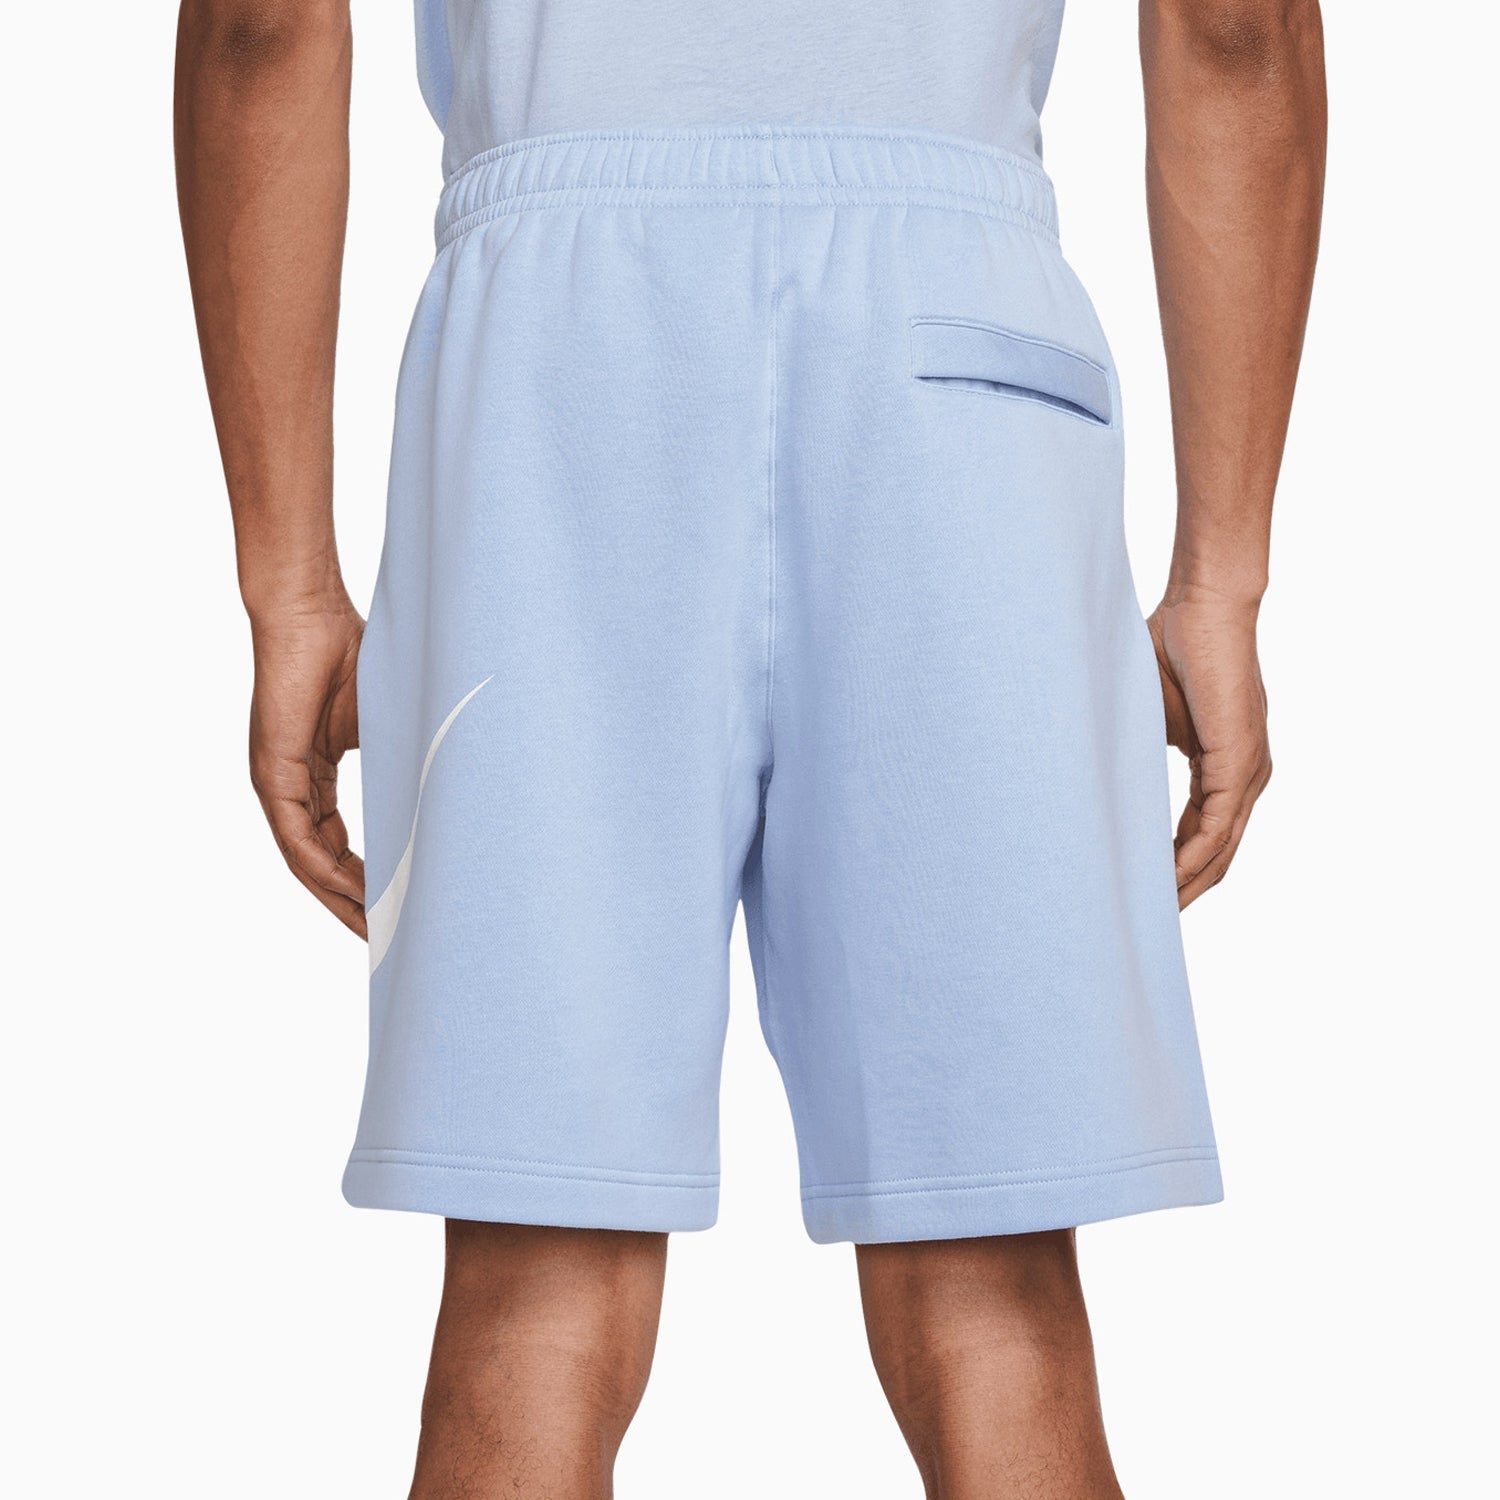 mens-nike-sportswear-t-shirt-and-short-outfit-dn5243-548-bv2721-548